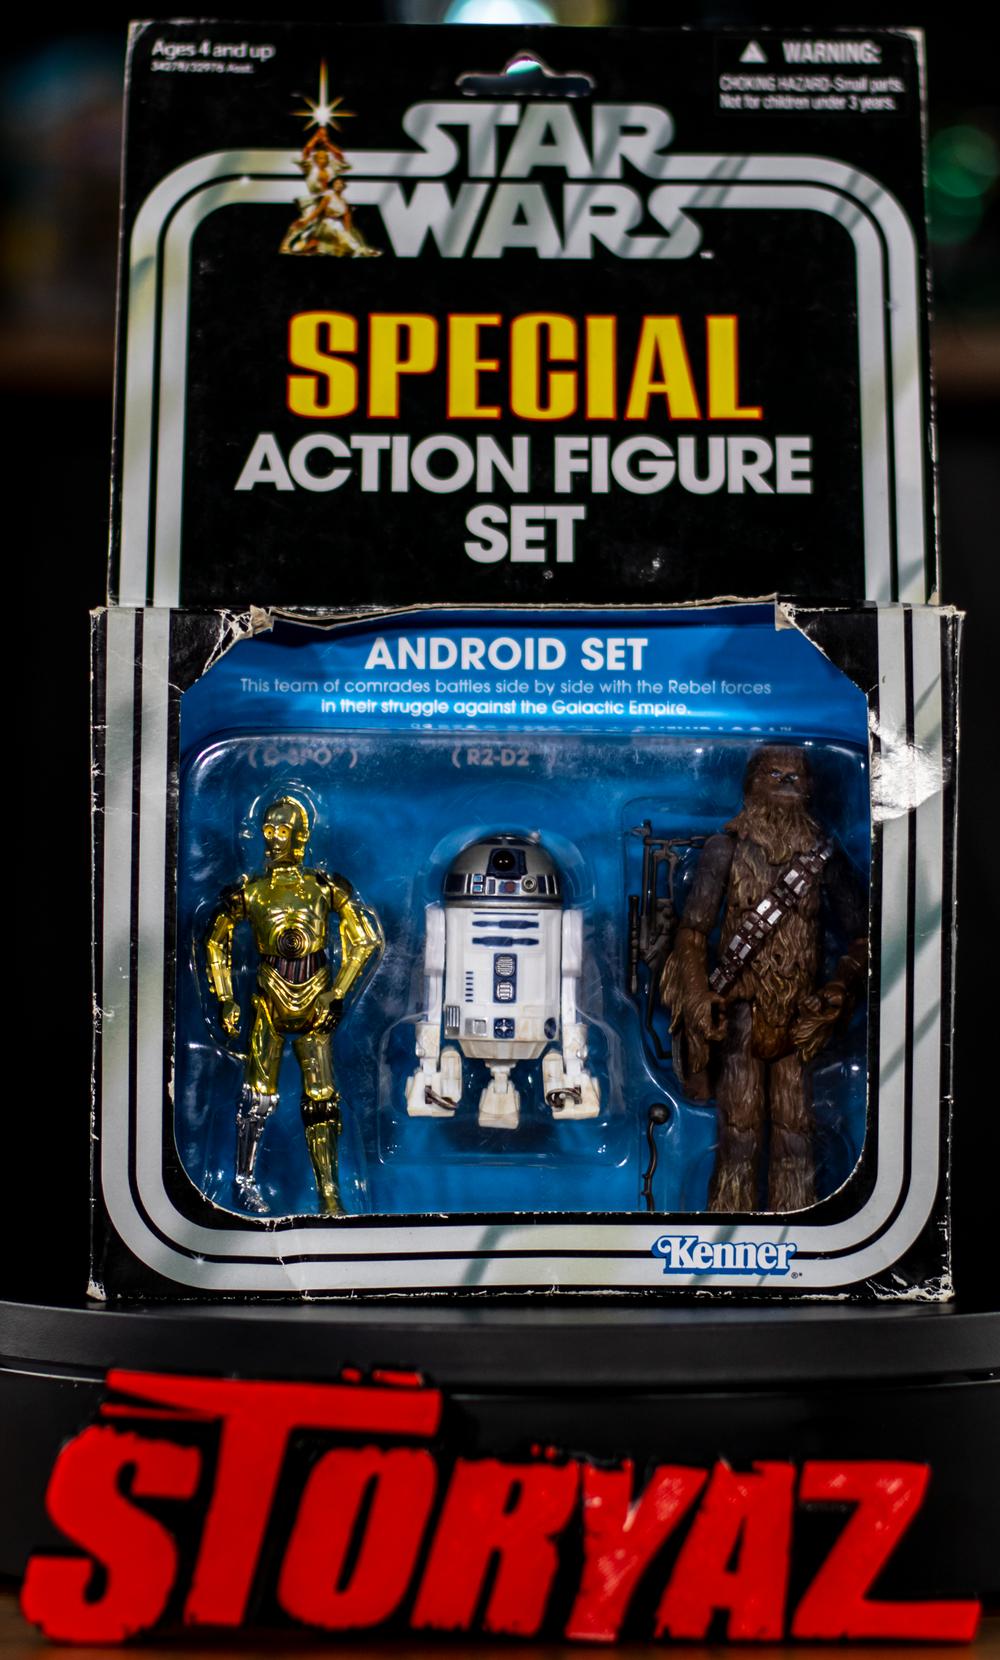 Star Wars: Special Action Figures Set "Android Set"